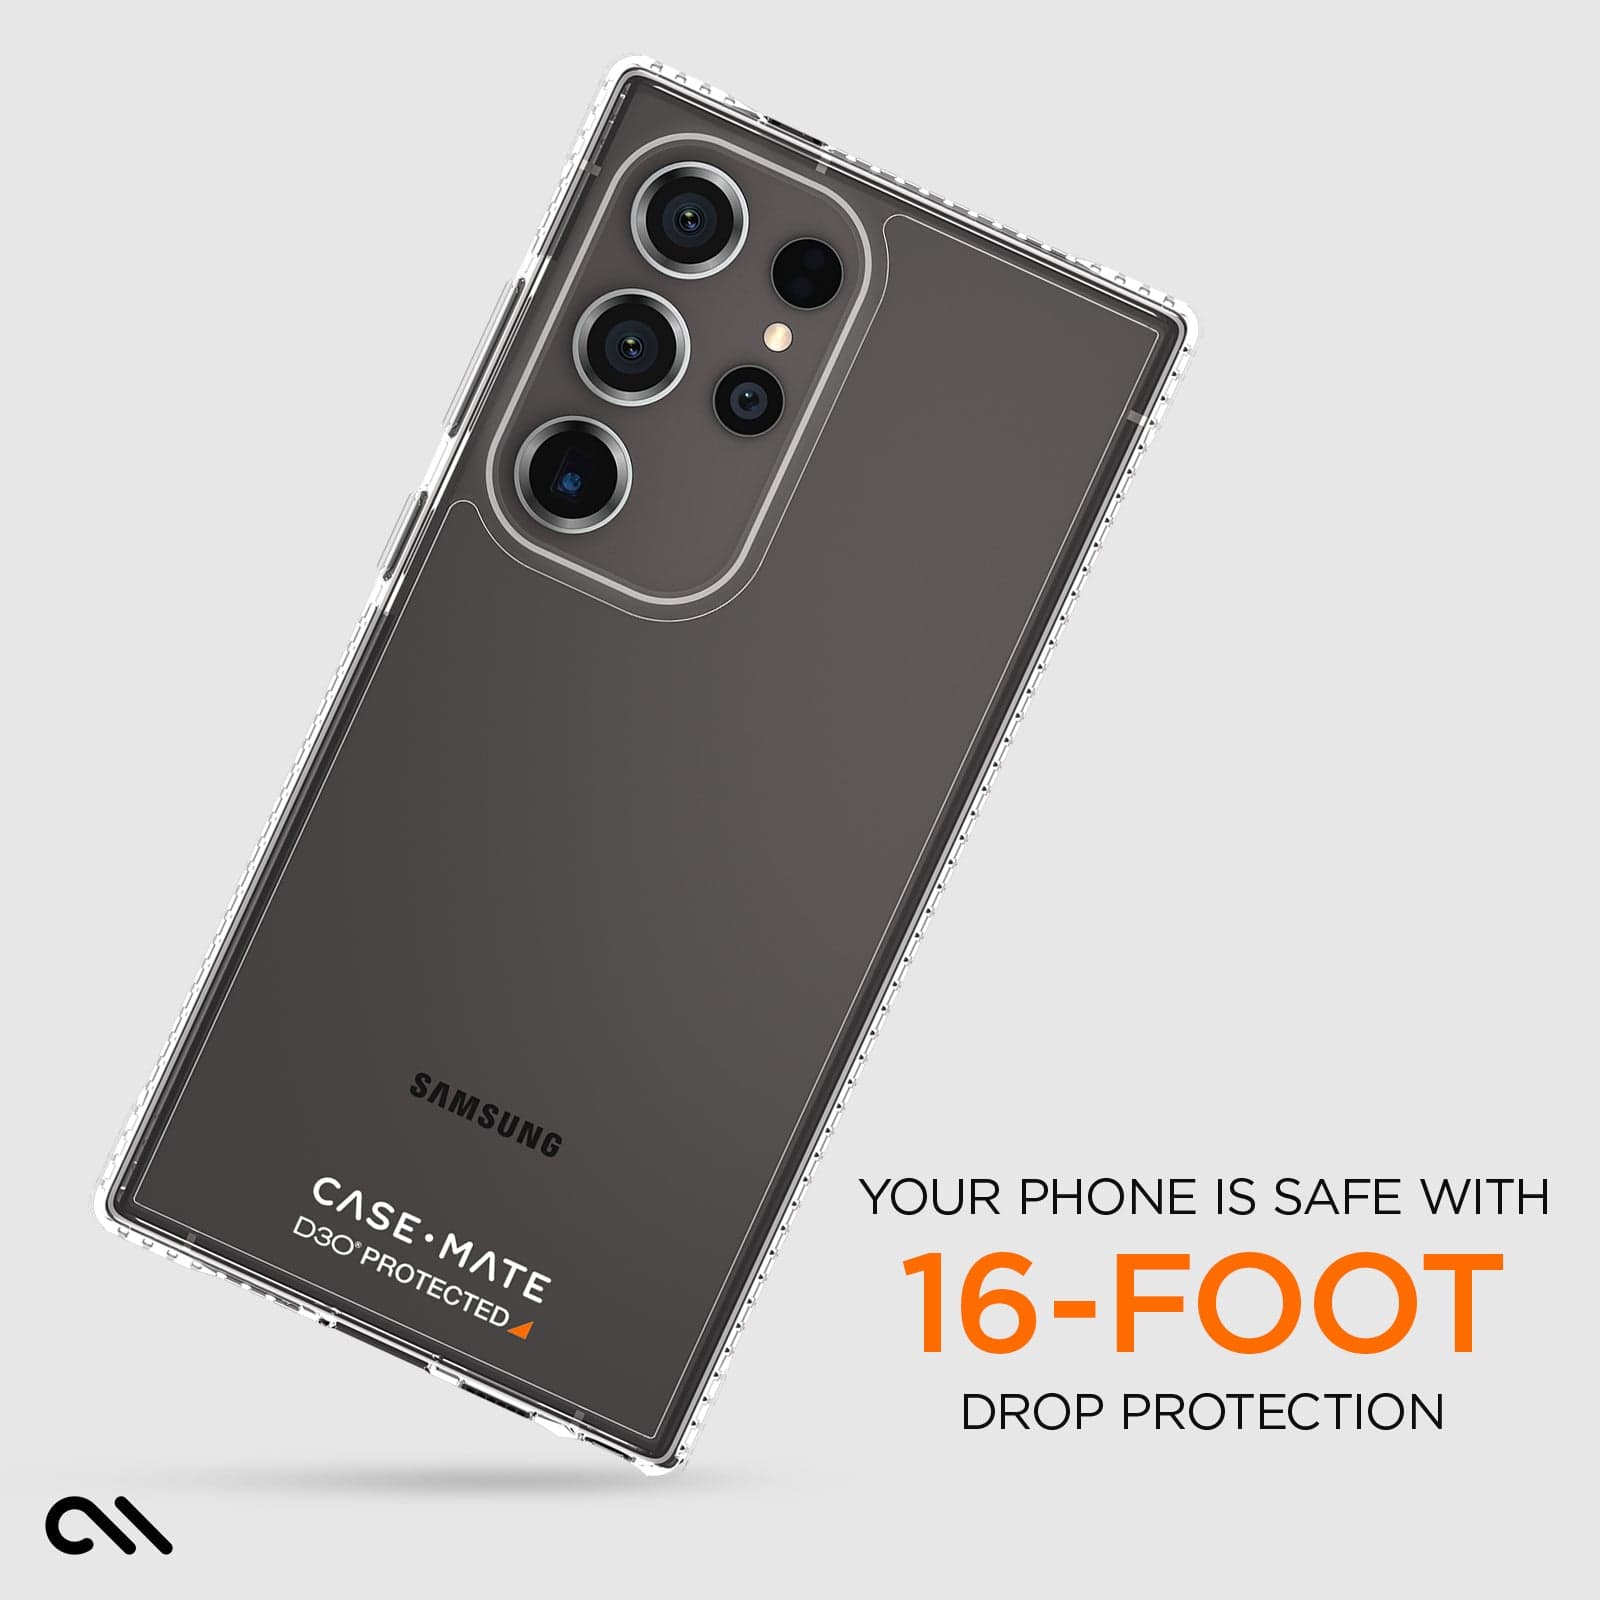 YOUR PHONE IS SAFE WITH 16-FOOT DROP PROTECTION